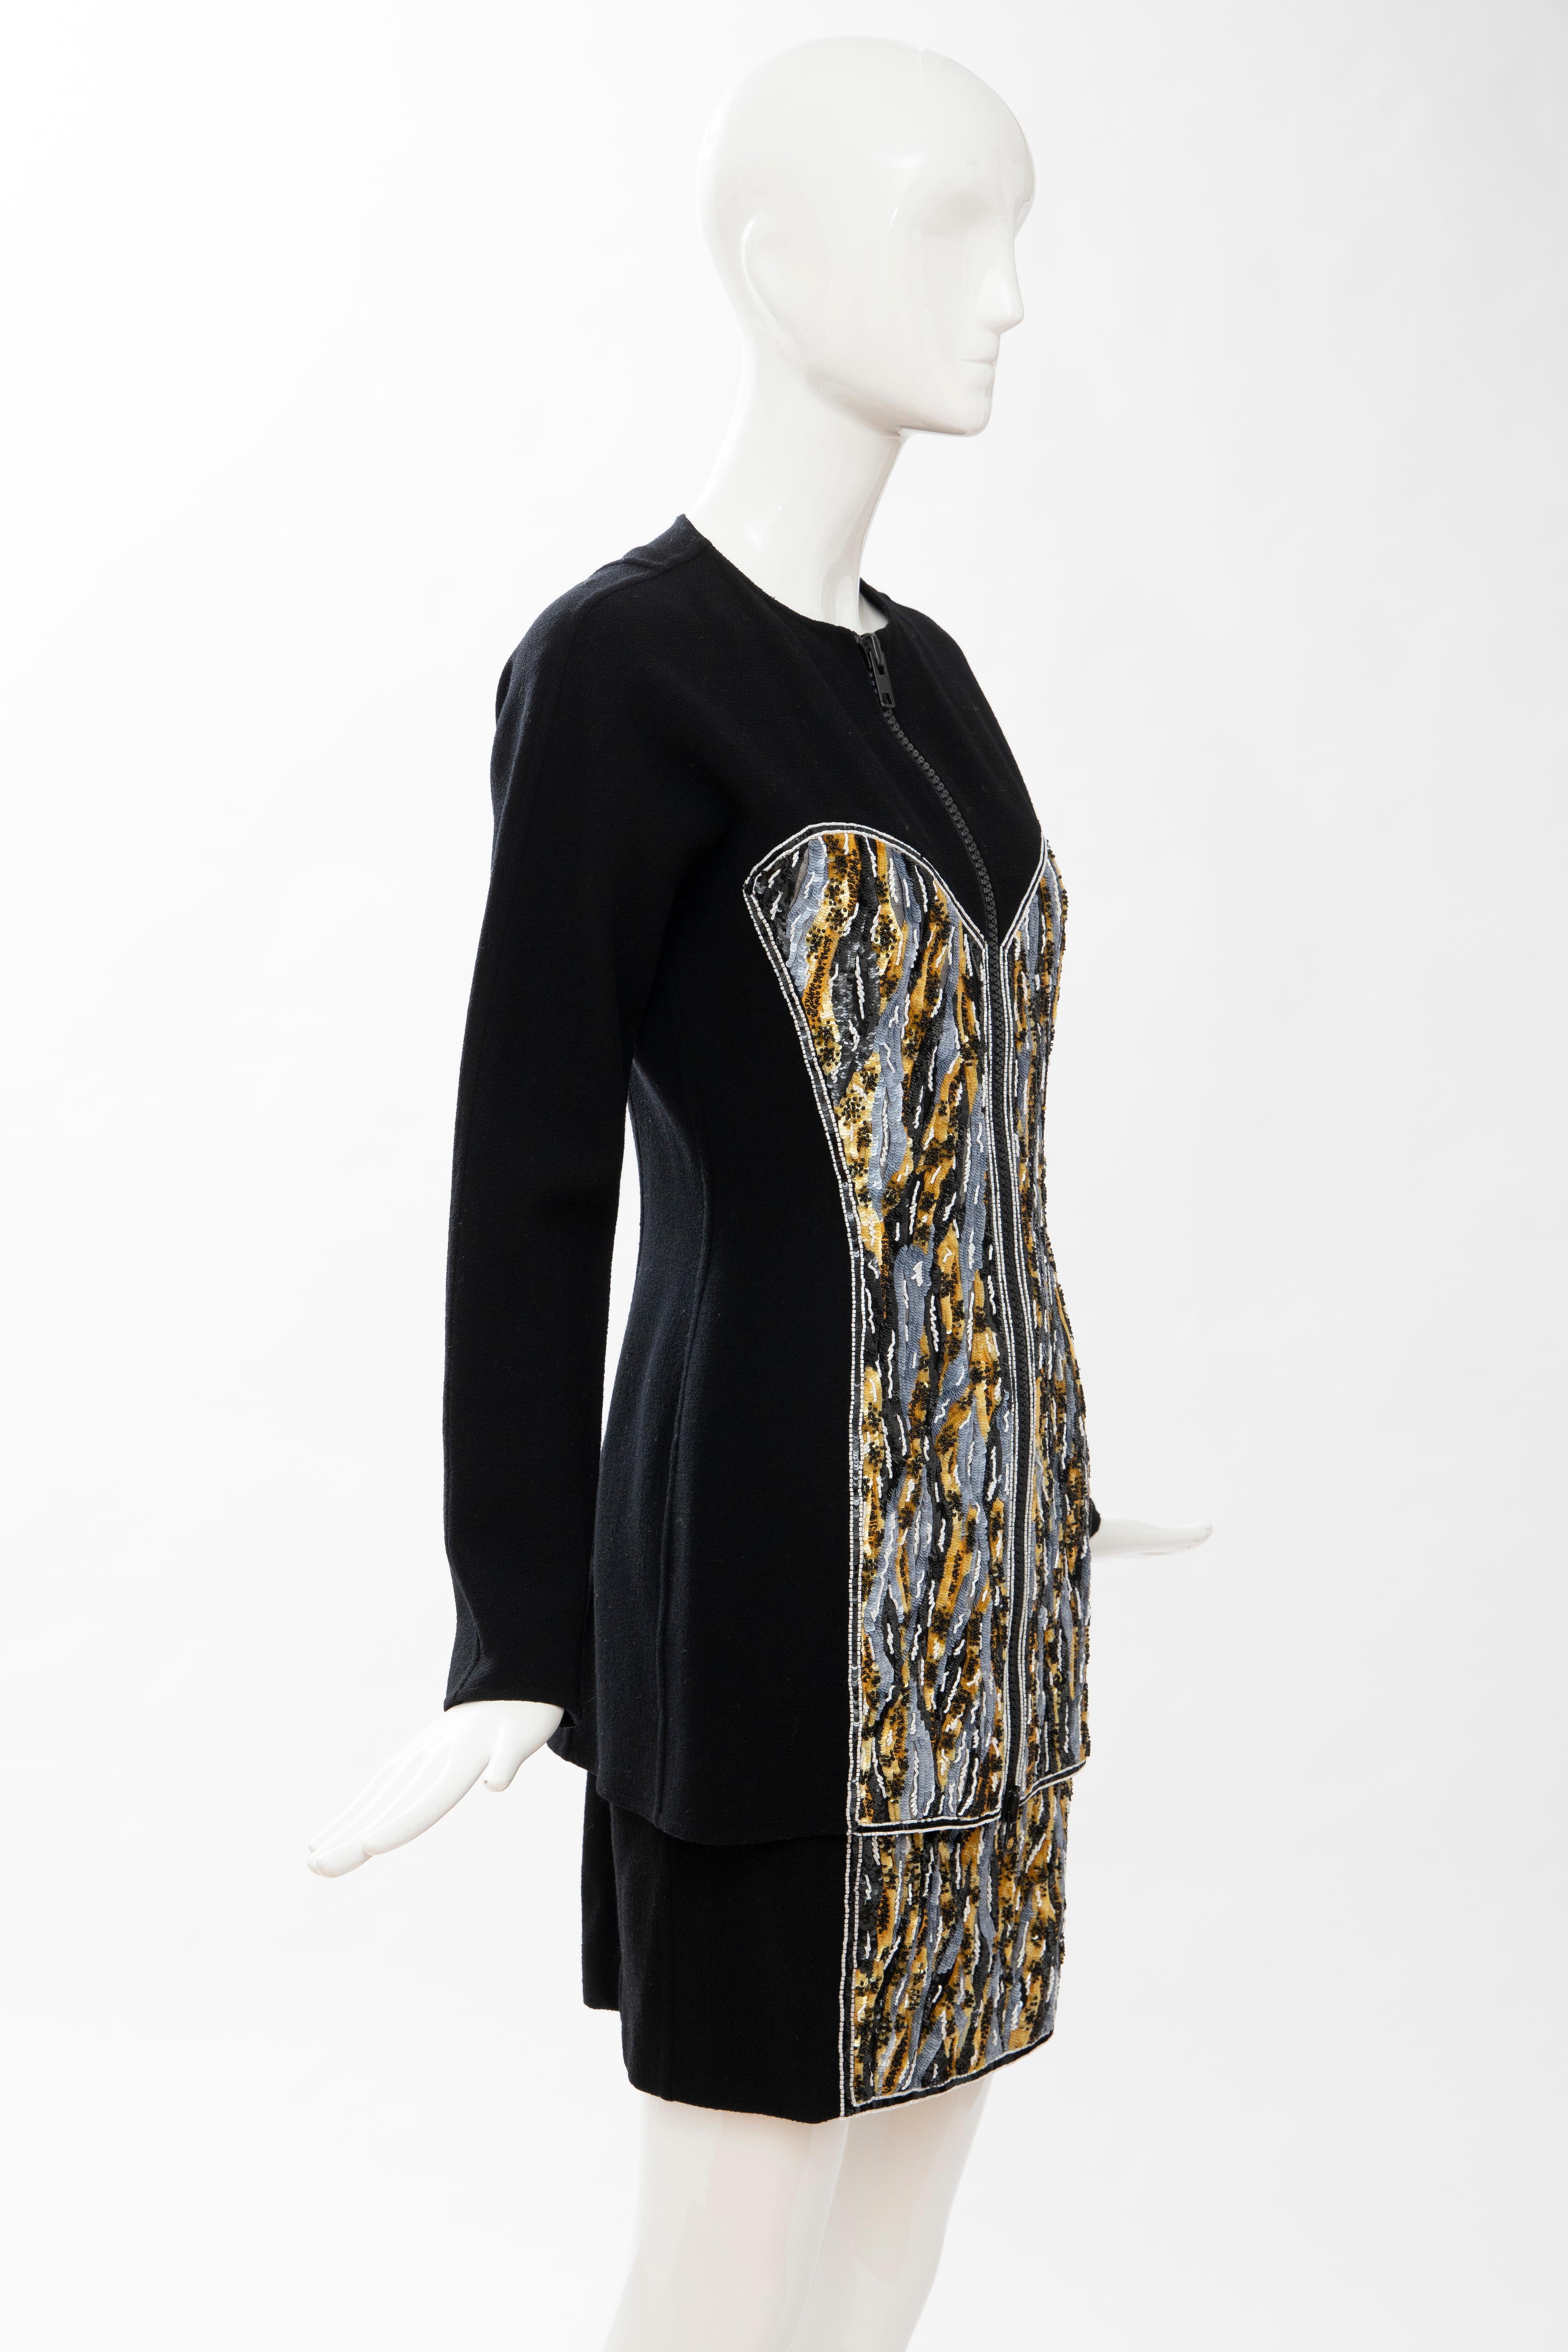 Geoffrey Beene Black Wool Crepe Embroidered Sequins Dress Ensemble, Circa 1990's For Sale 3